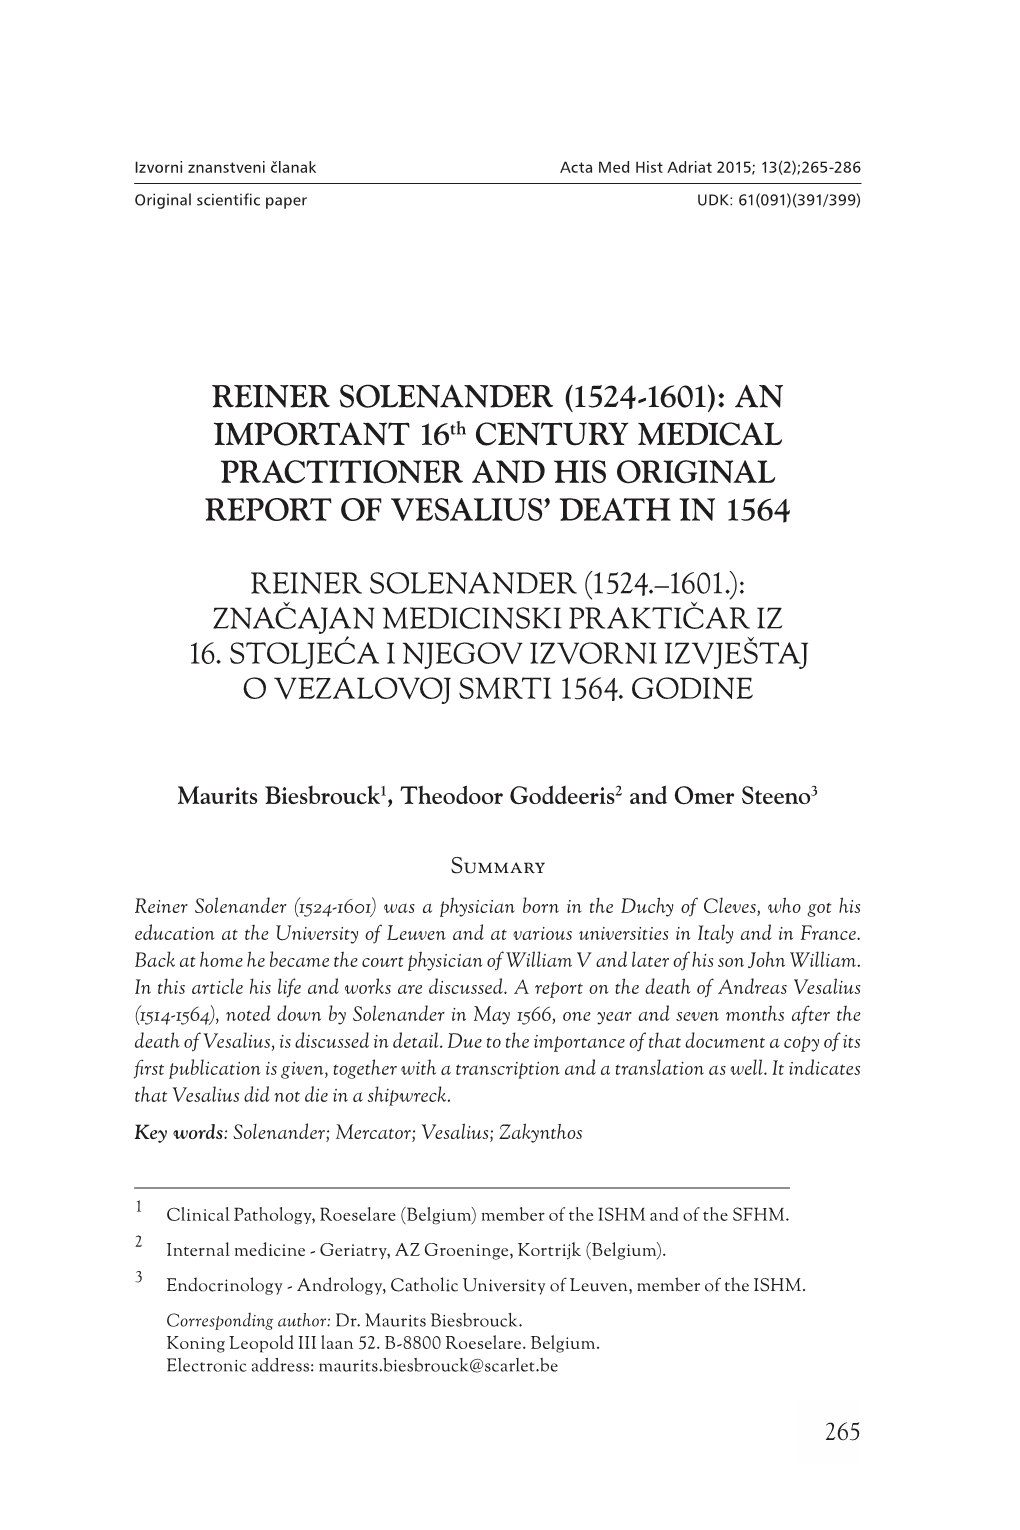 REINER SOLENANDER (1524-1601): an IMPORTANT 16Th CENTURY MEDICAL PRACTITIONER and HIS ORIGINAL REPORT of VESALIUS’ DEATH in 1564